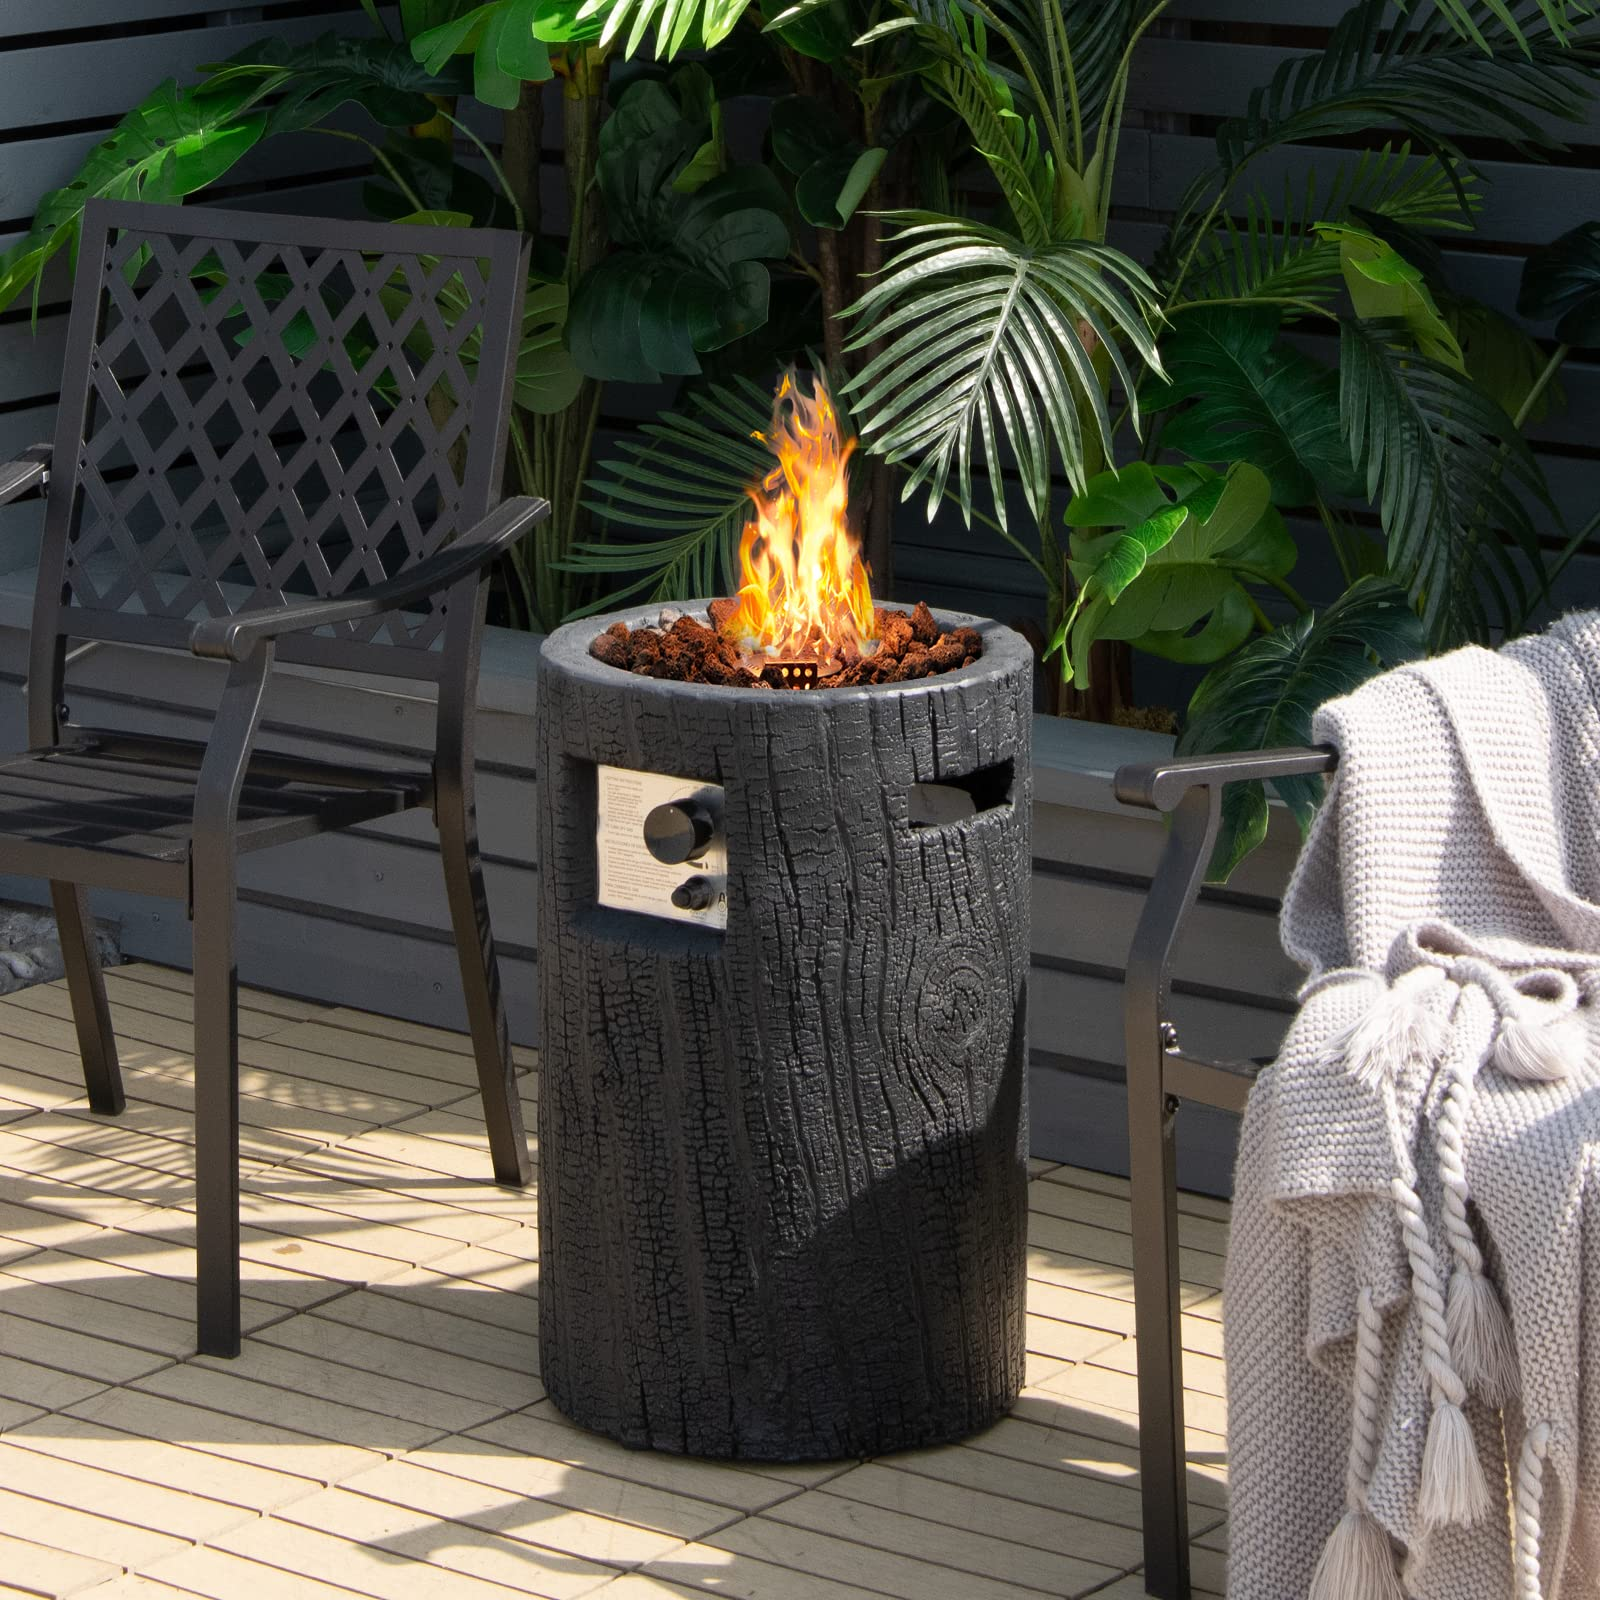 Giantex Fire Pit Outdoor 16" Electronic Ignition Round Fireplace with 30,000 BTU Heat Output